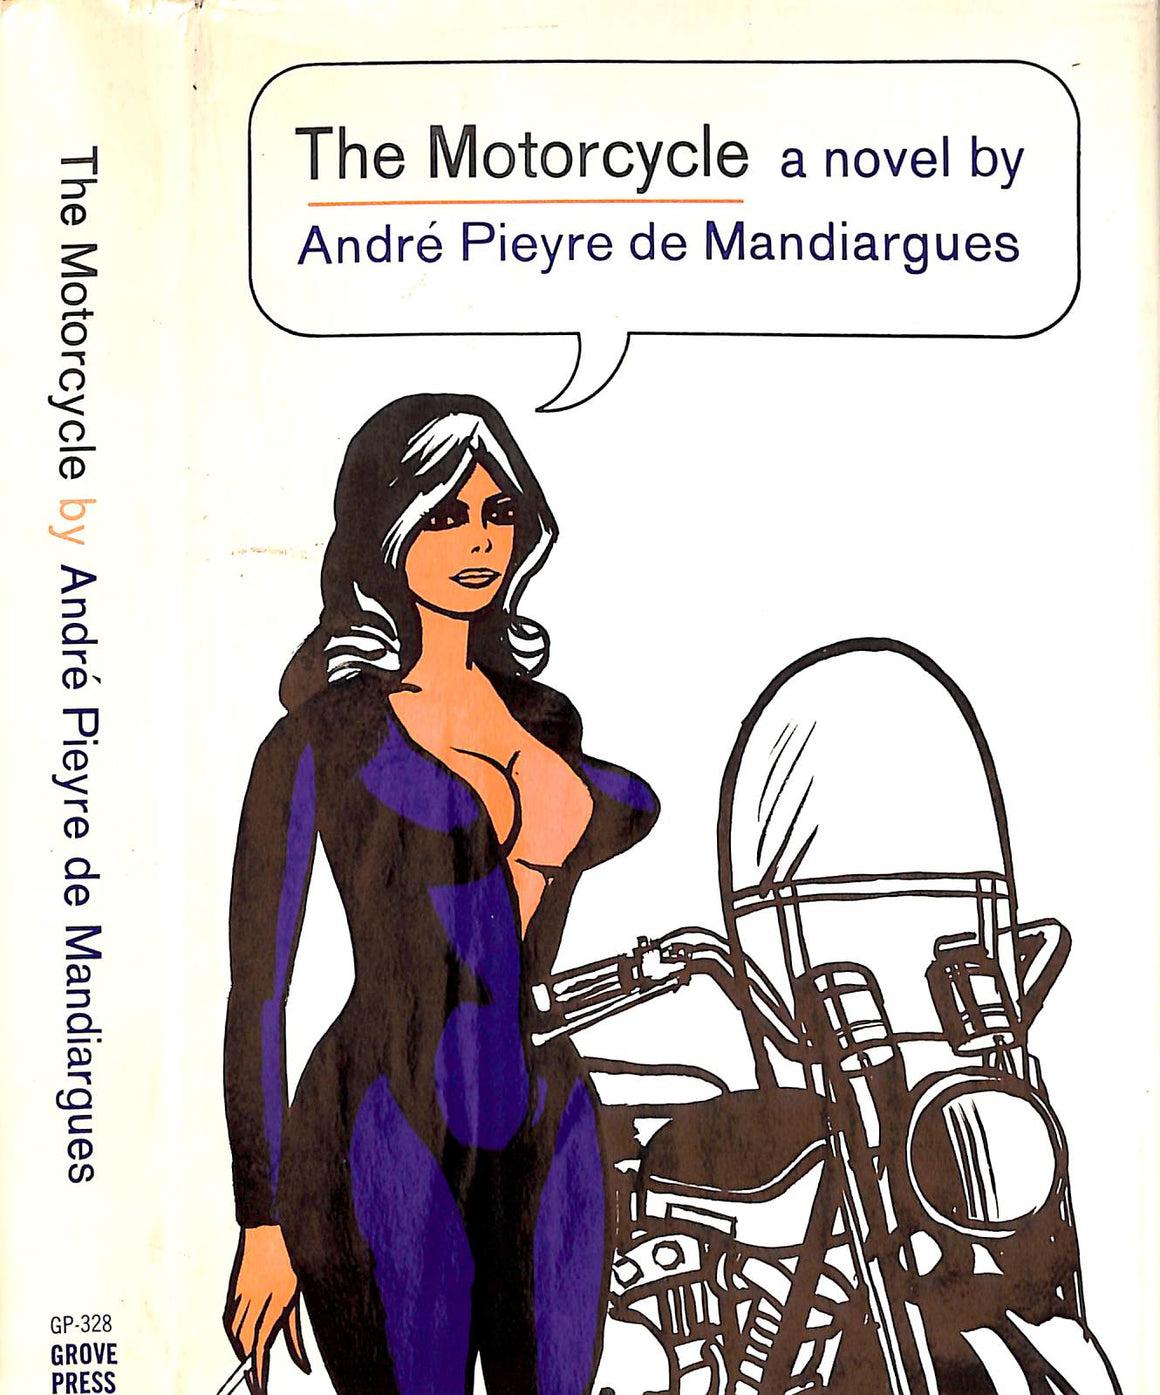 "The Motorcycle" 1965 DE MANDIARGUES, Andre Pieyre